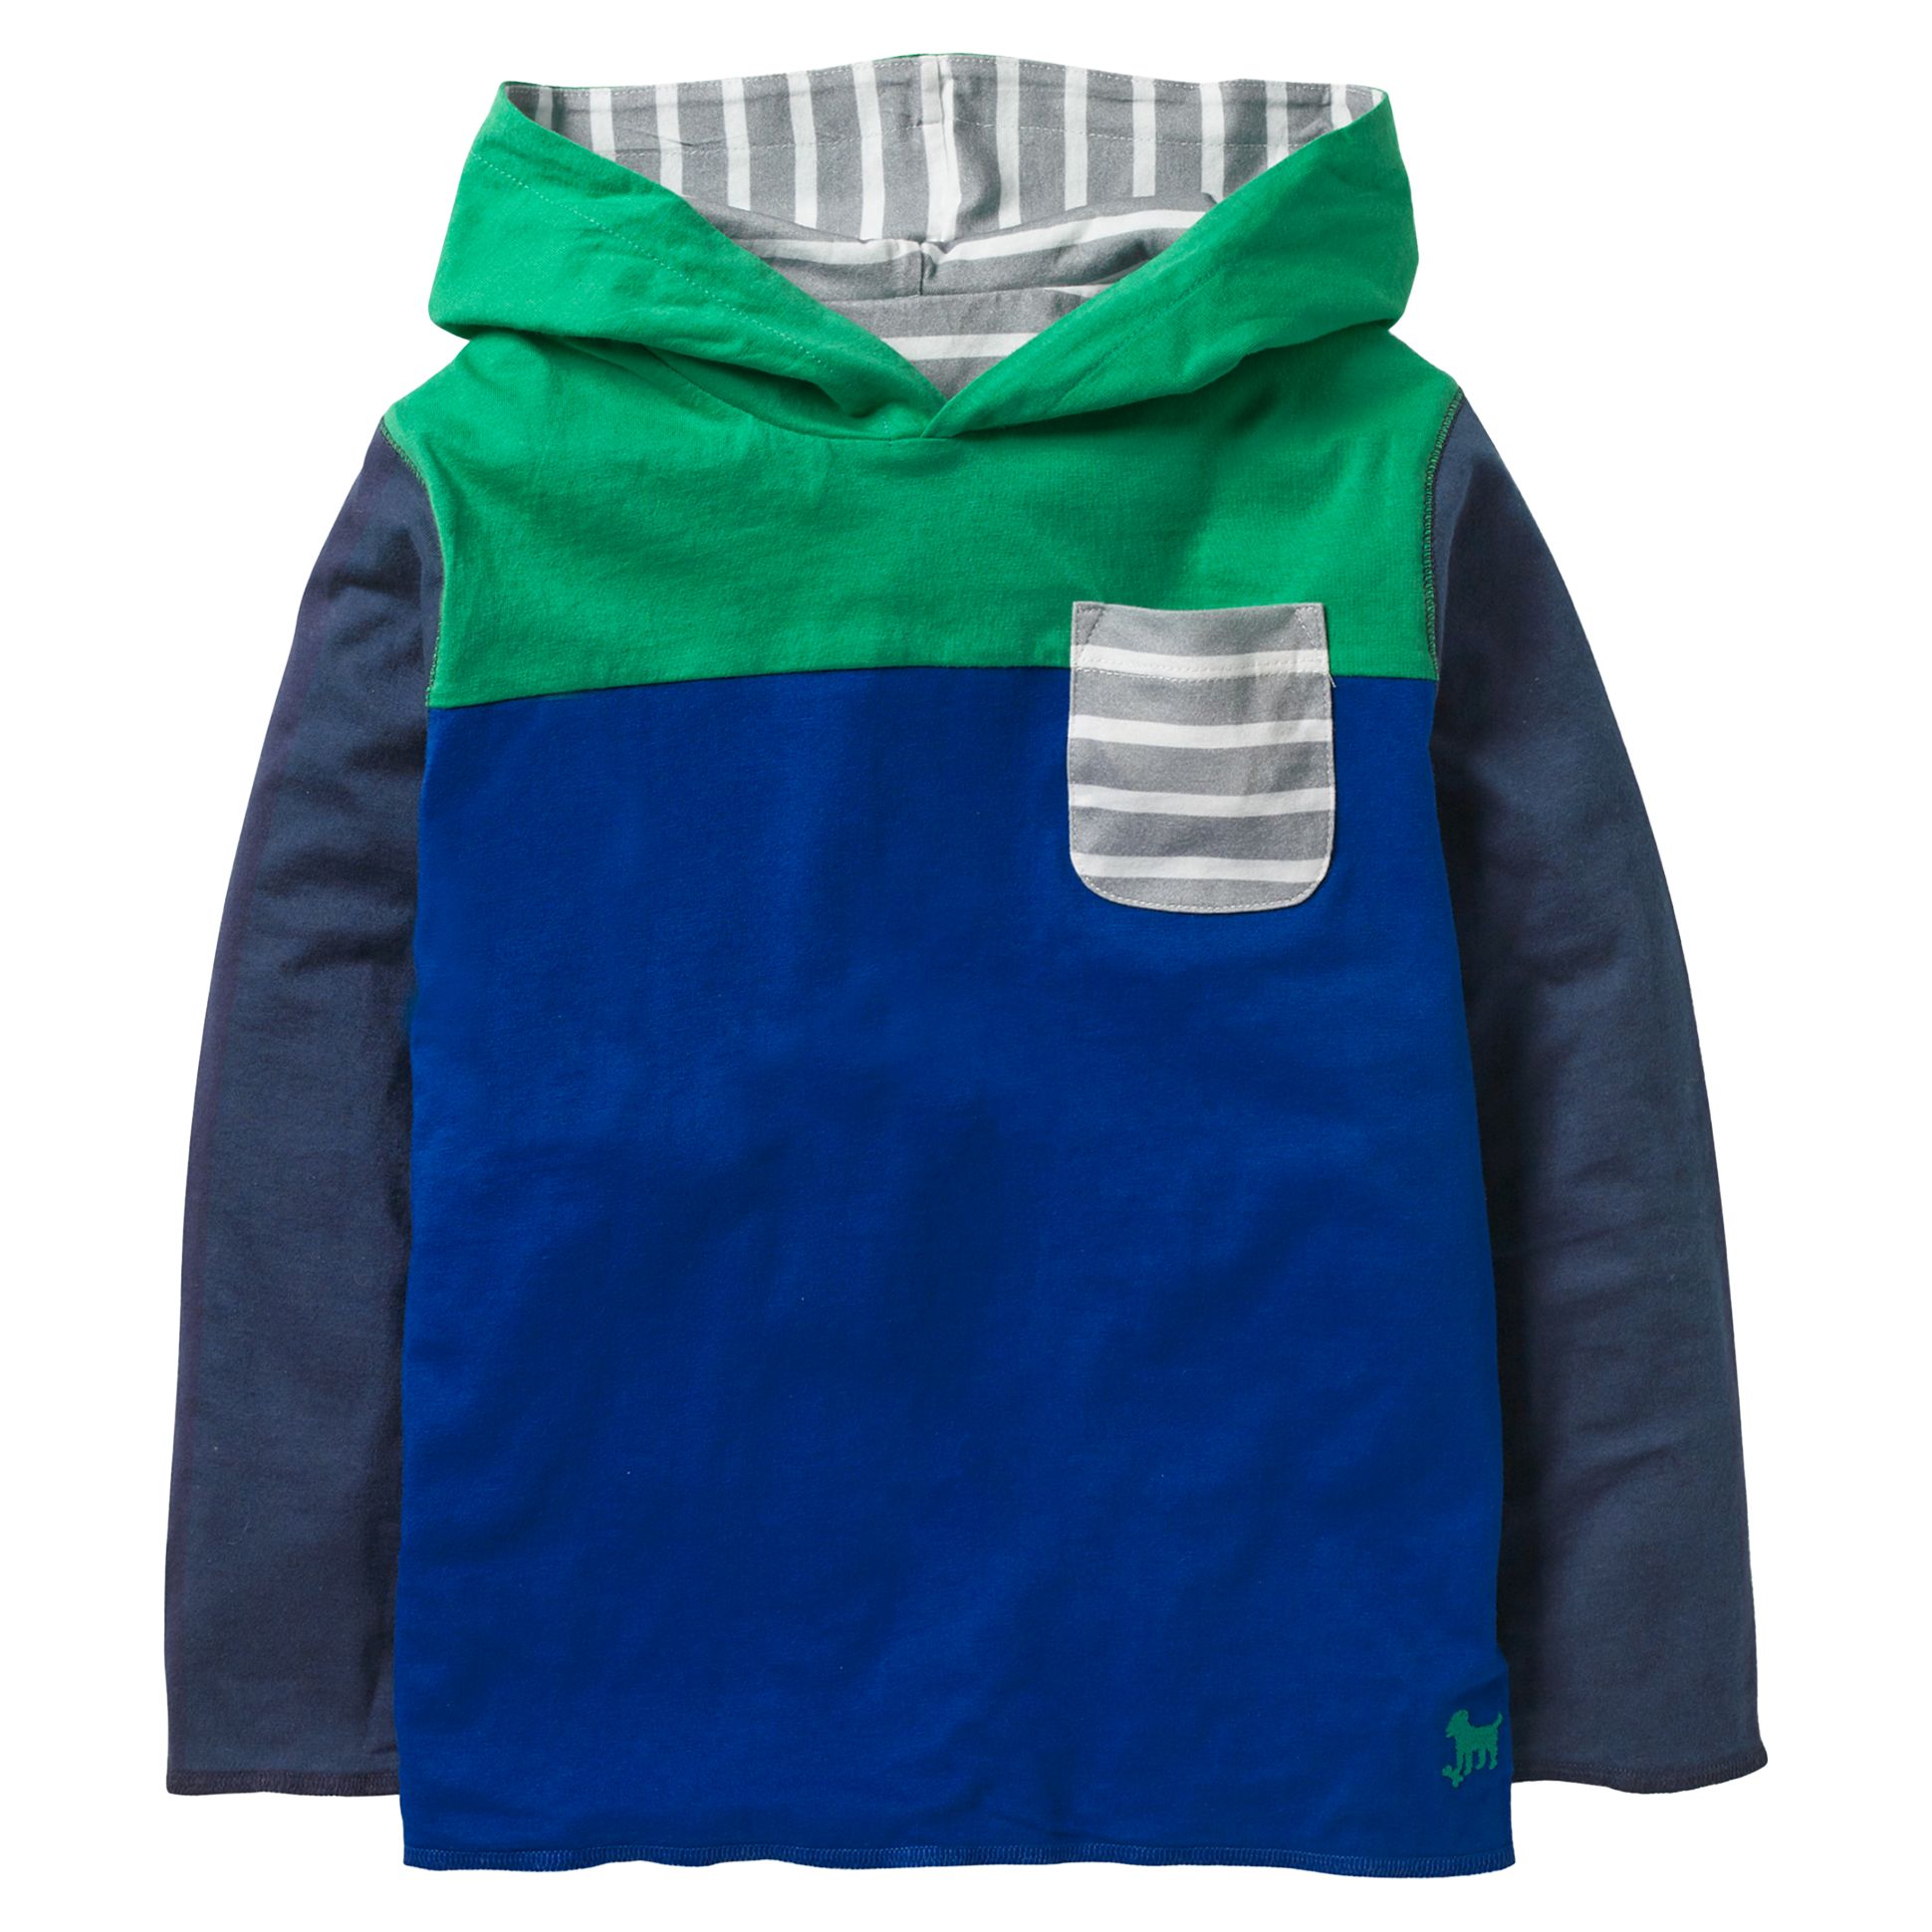 Mini Boden Boys' Reversible Hooded Top, Blue/Grey, 5-6 years